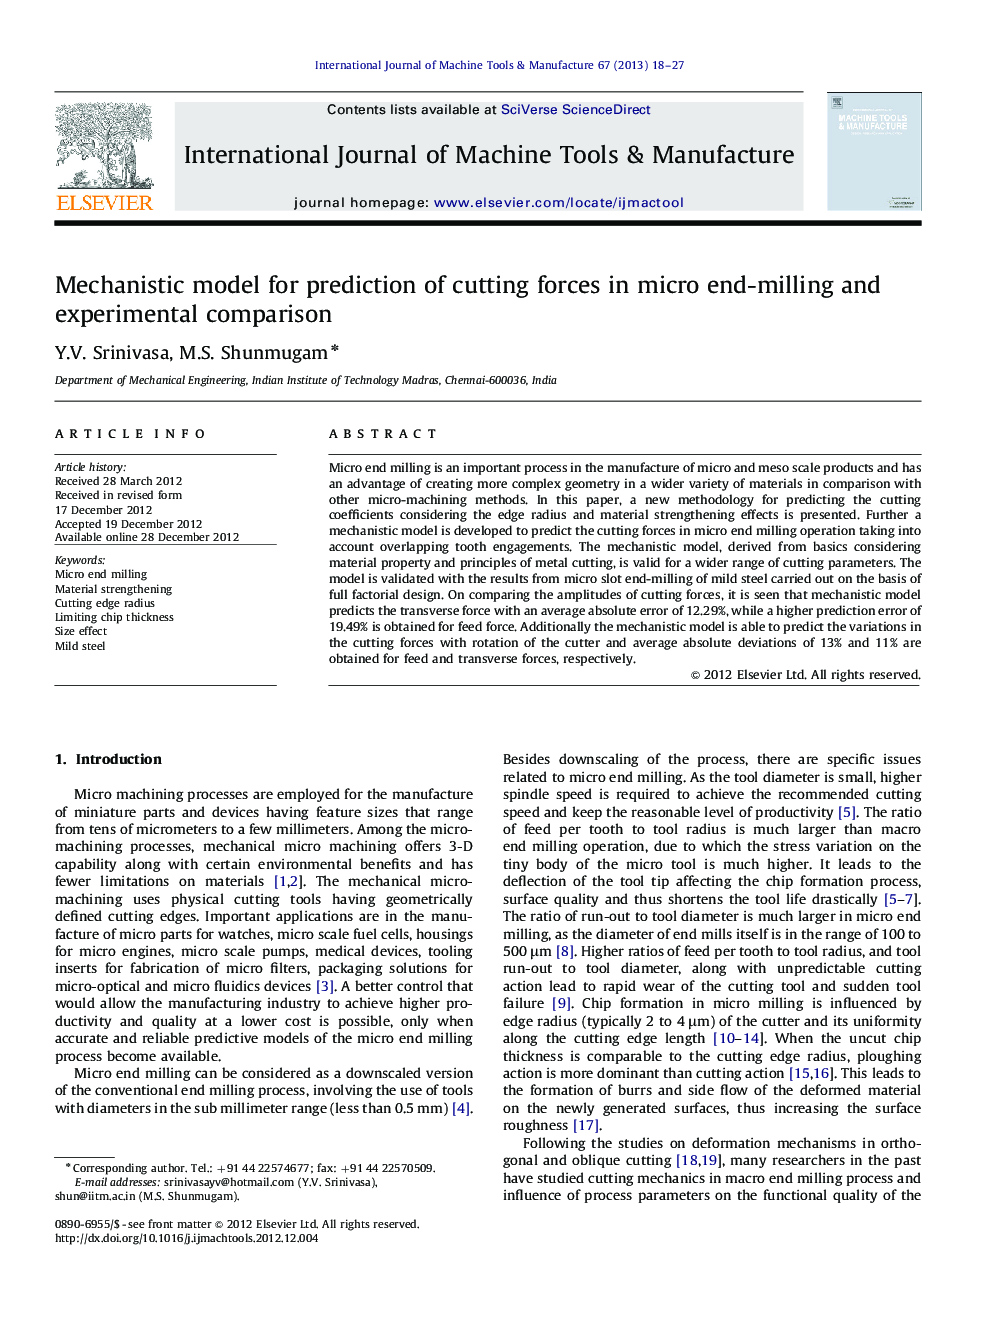 Mechanistic model for prediction of cutting forces in micro end-milling and experimental comparison